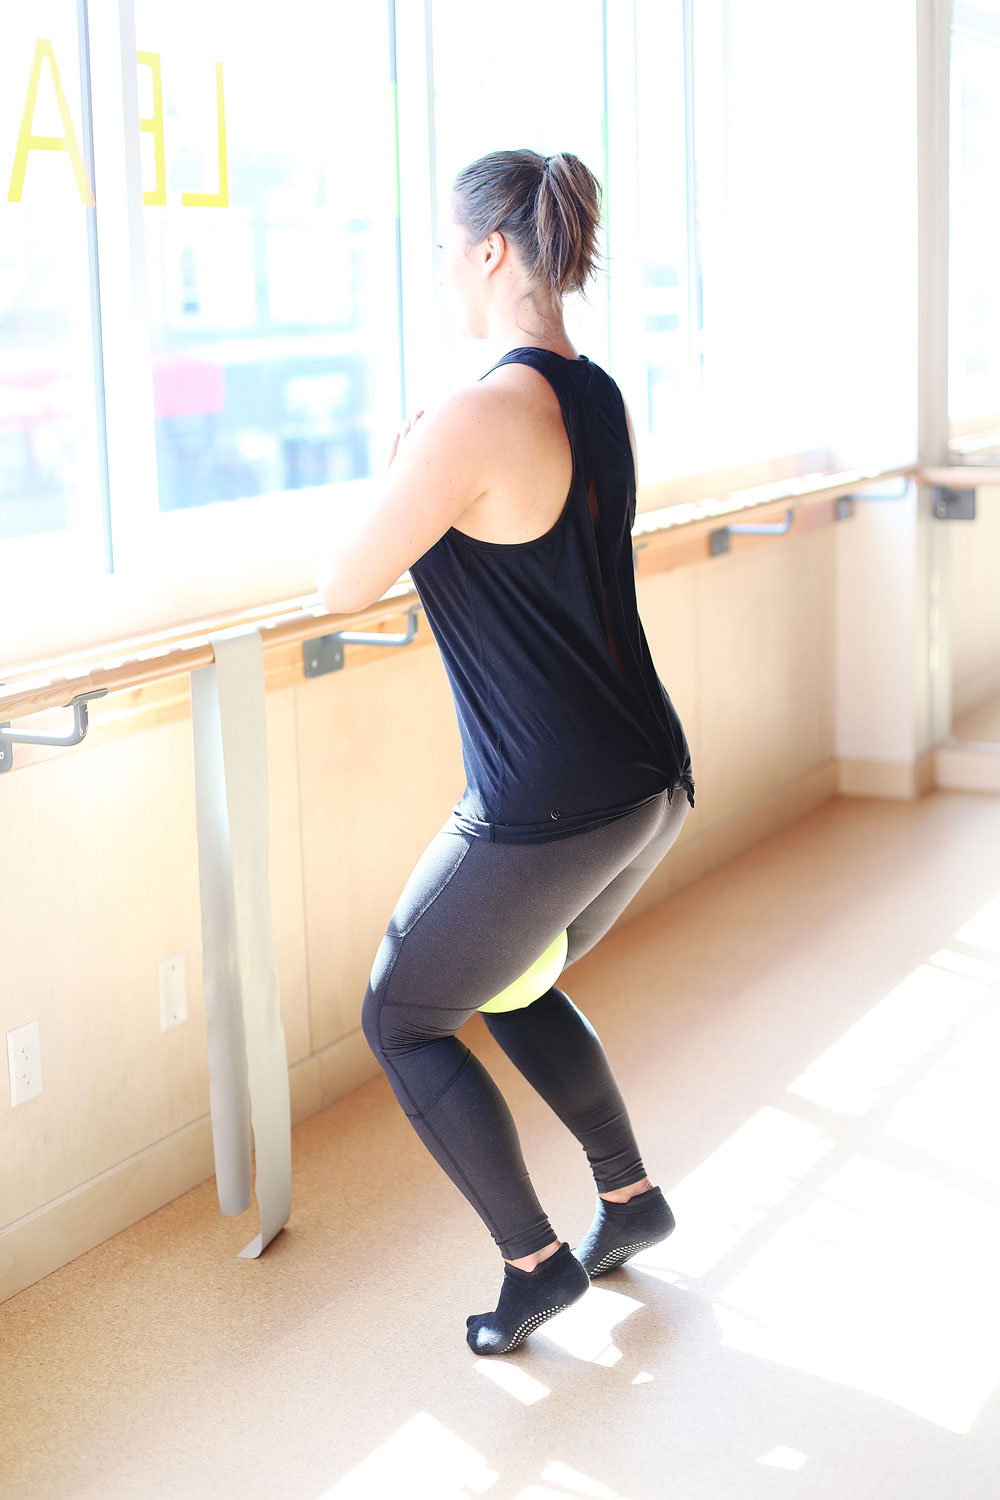 Barre workout for toned legs